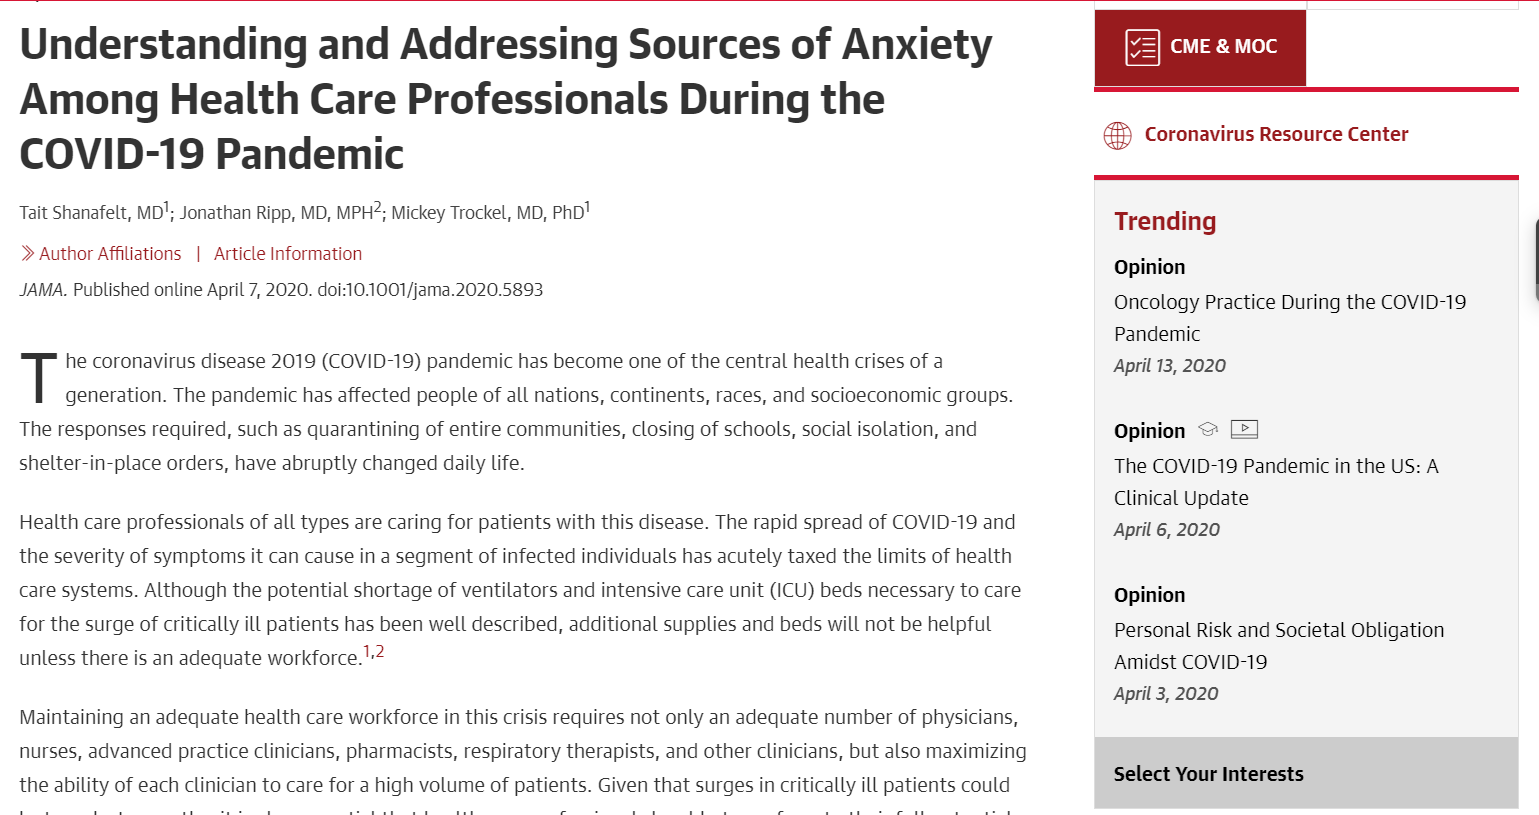 Understanding and Addressing Sources of Anxiety Among Health Care Professionals During the COVID-19 Pandemic